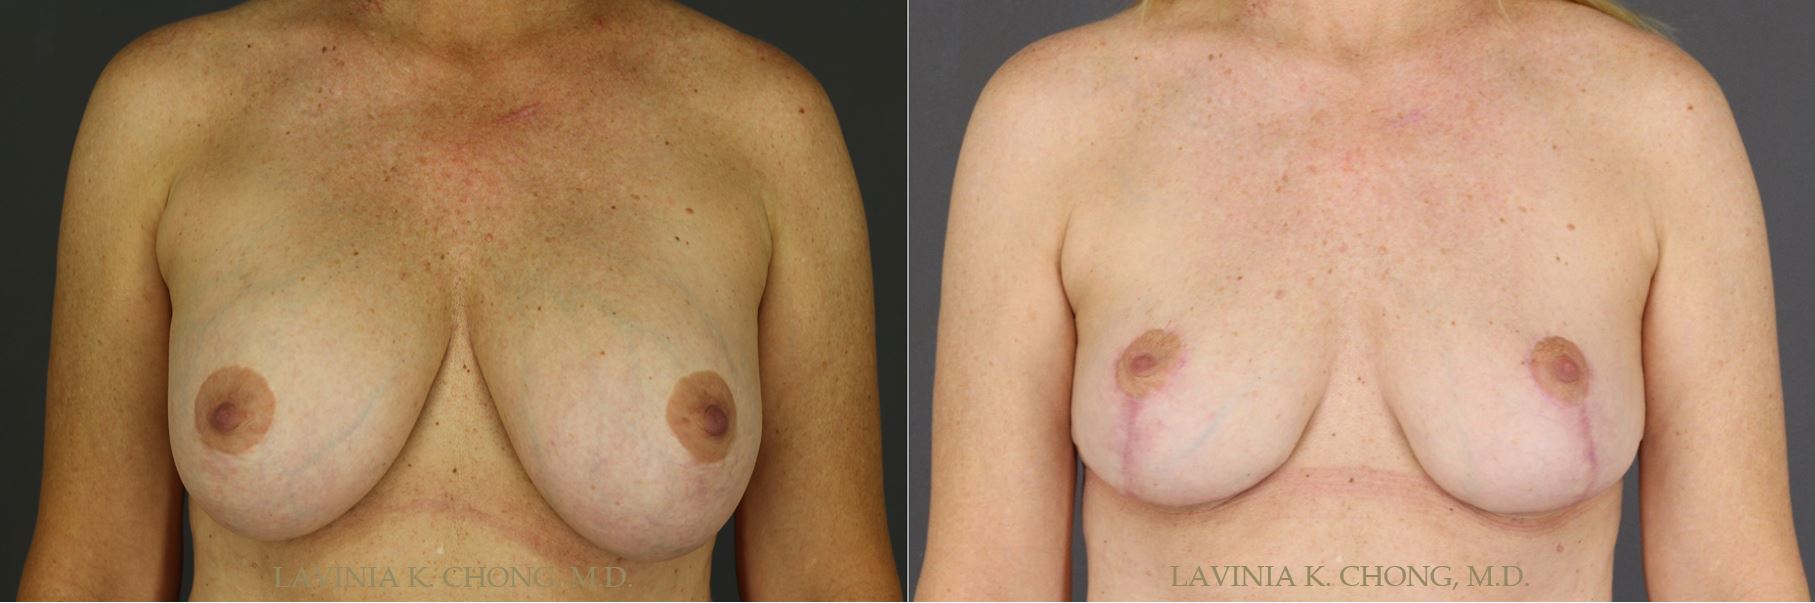 Before and After photo of 51 yr old with Breast Implant Malposition and Stretch Deformity. Surgical plan includes Implant Explantation with Mastopexy and Application of DuraSorb by female plastic surgeon in Newport Beach, California to achieve patient desire for smaller lifted breast.